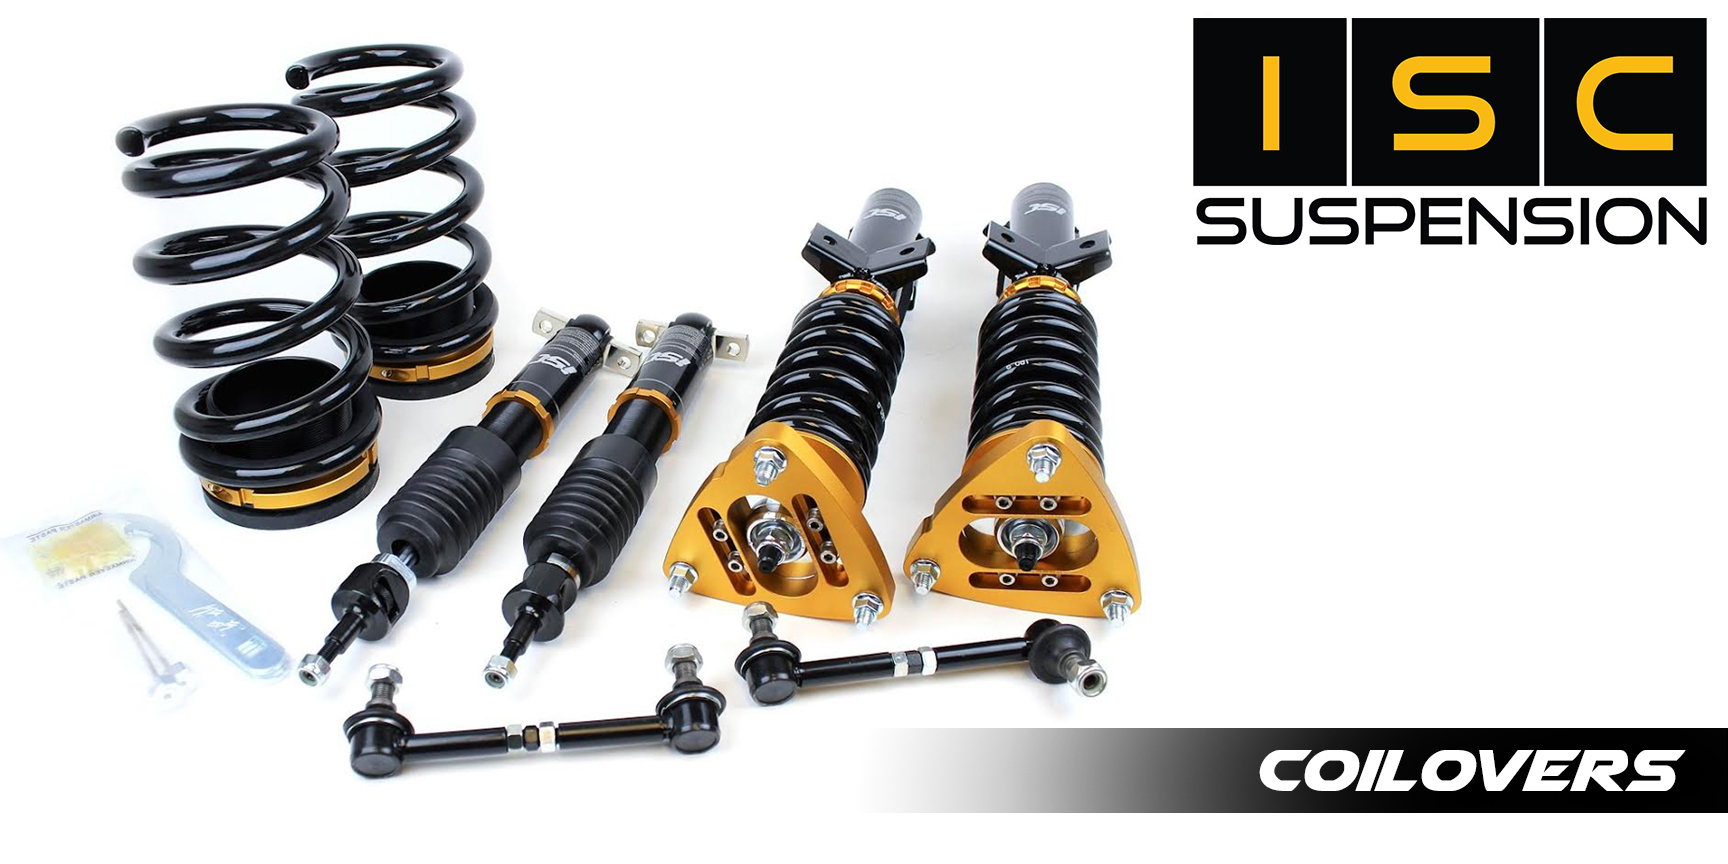 ISC Suspension at Drift American